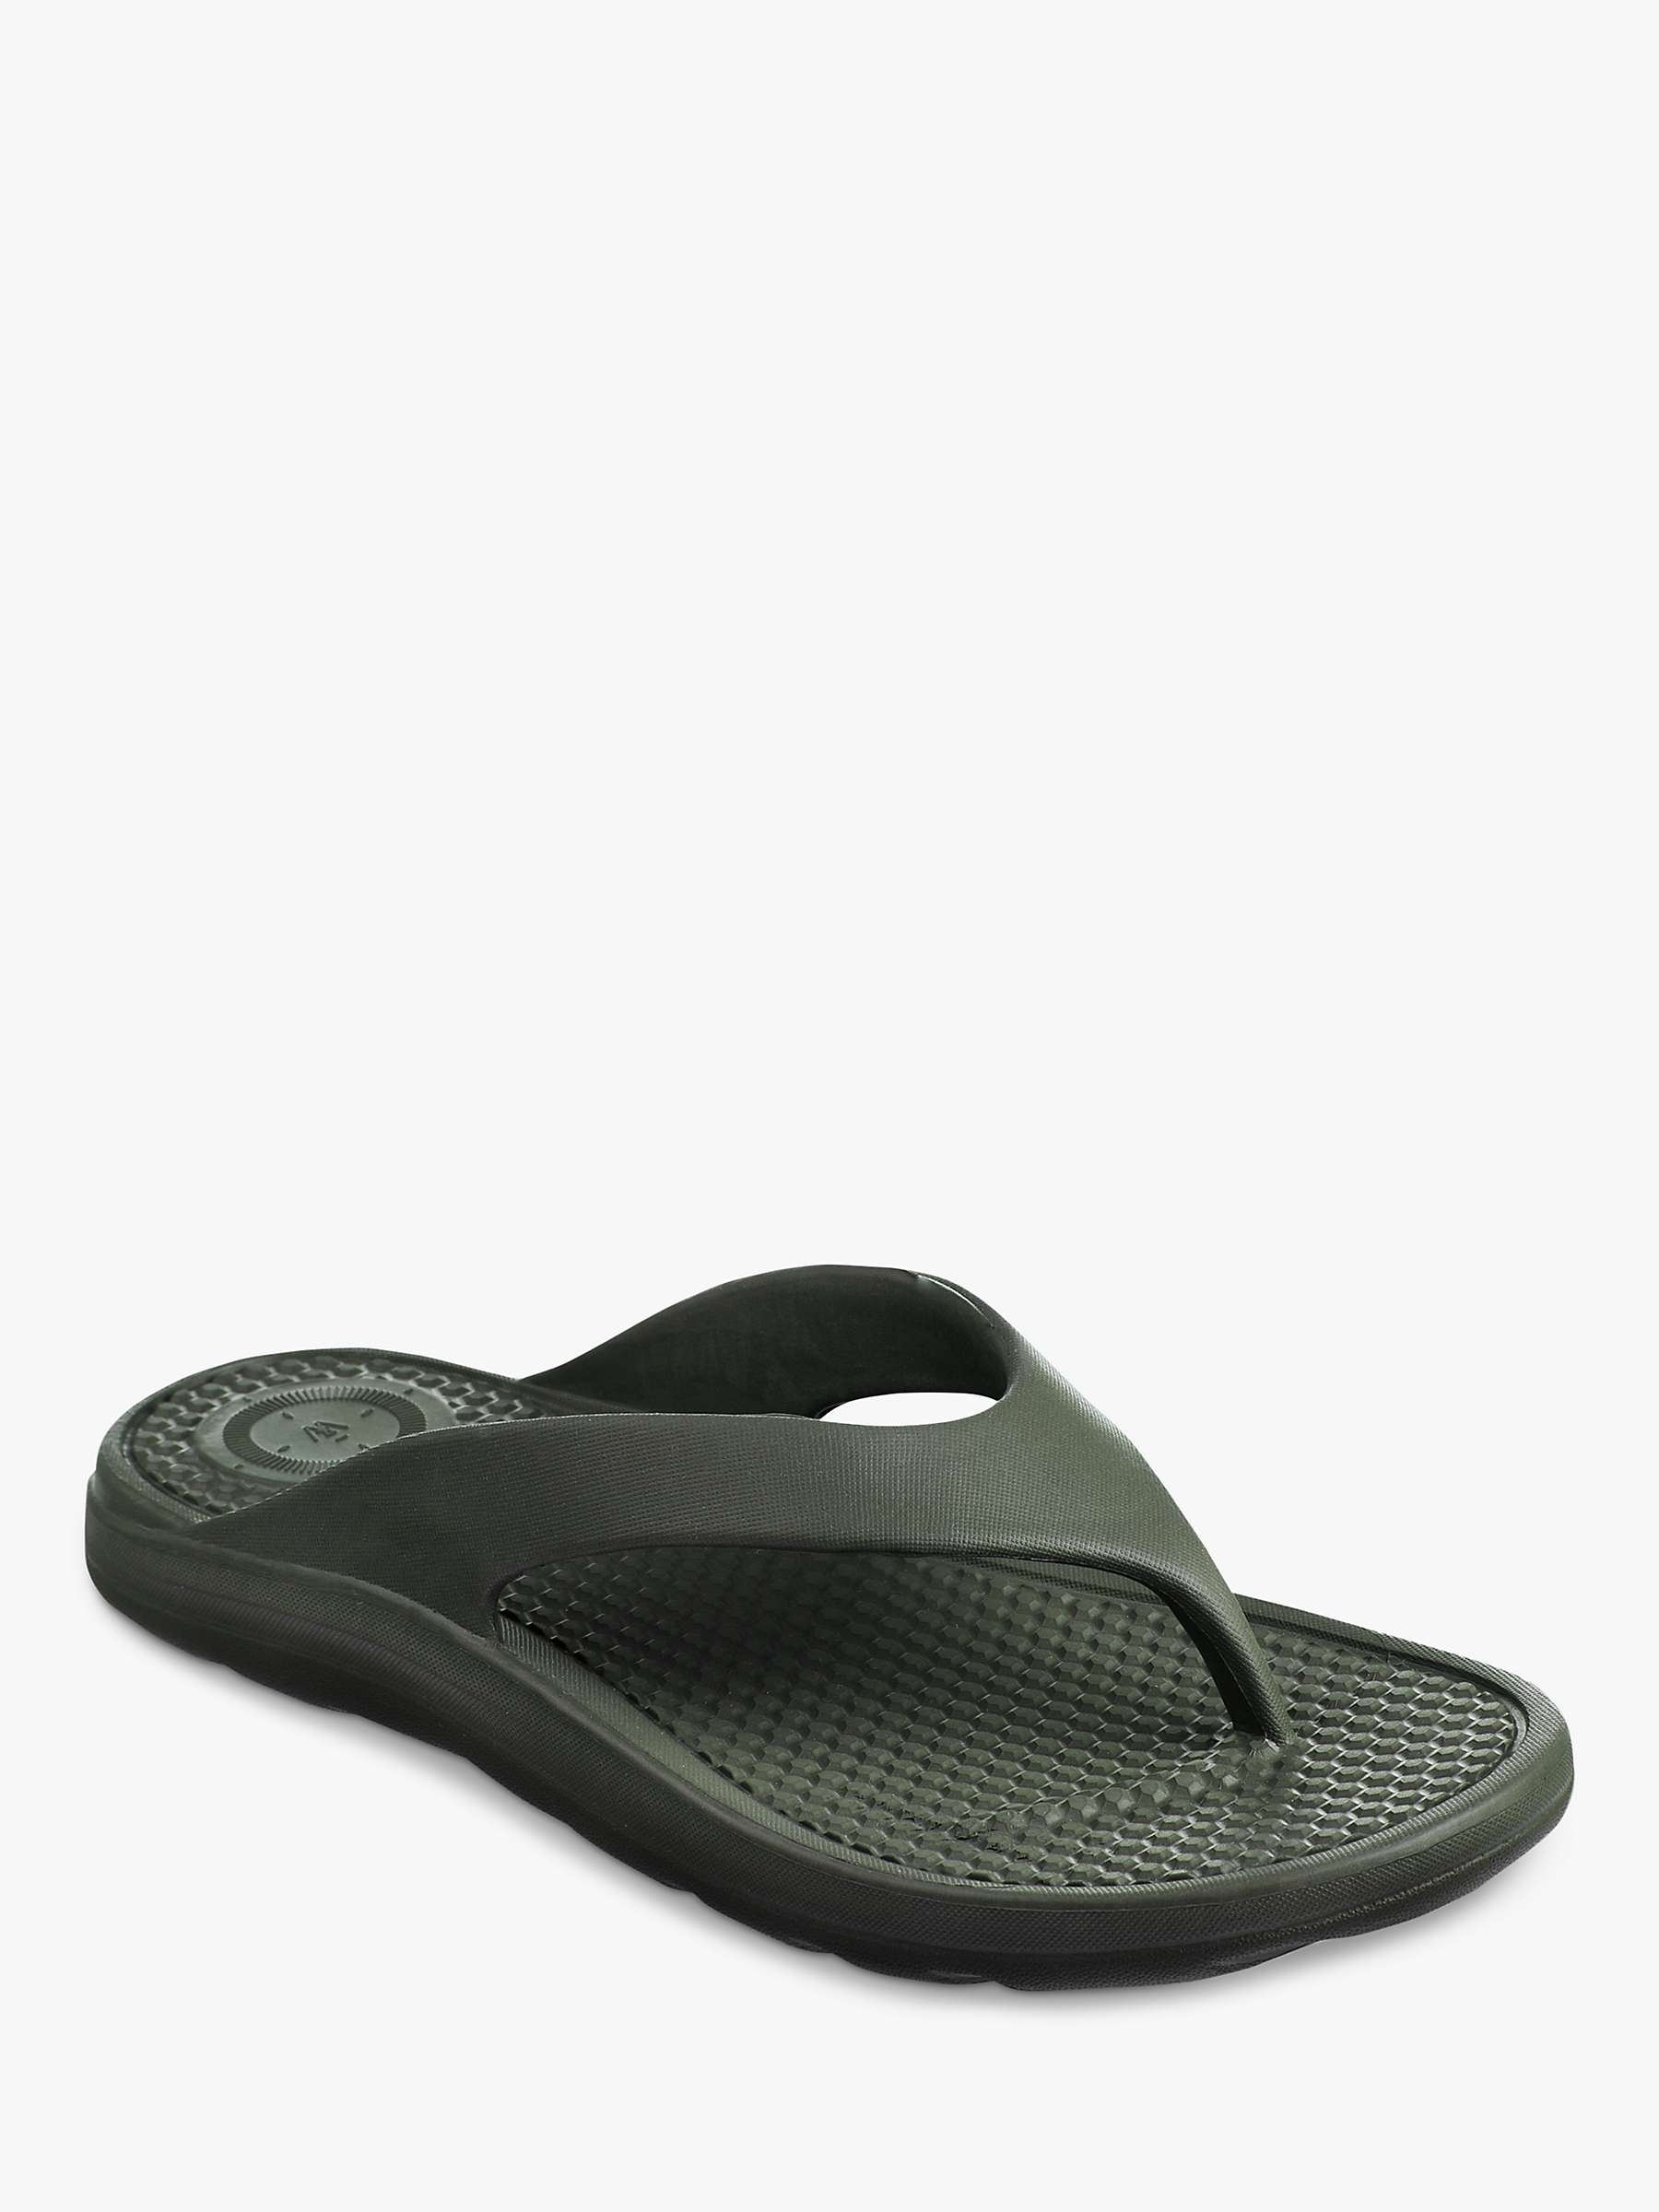 Buy totes SOLBOUNCE Toe Post Sandals Online at johnlewis.com